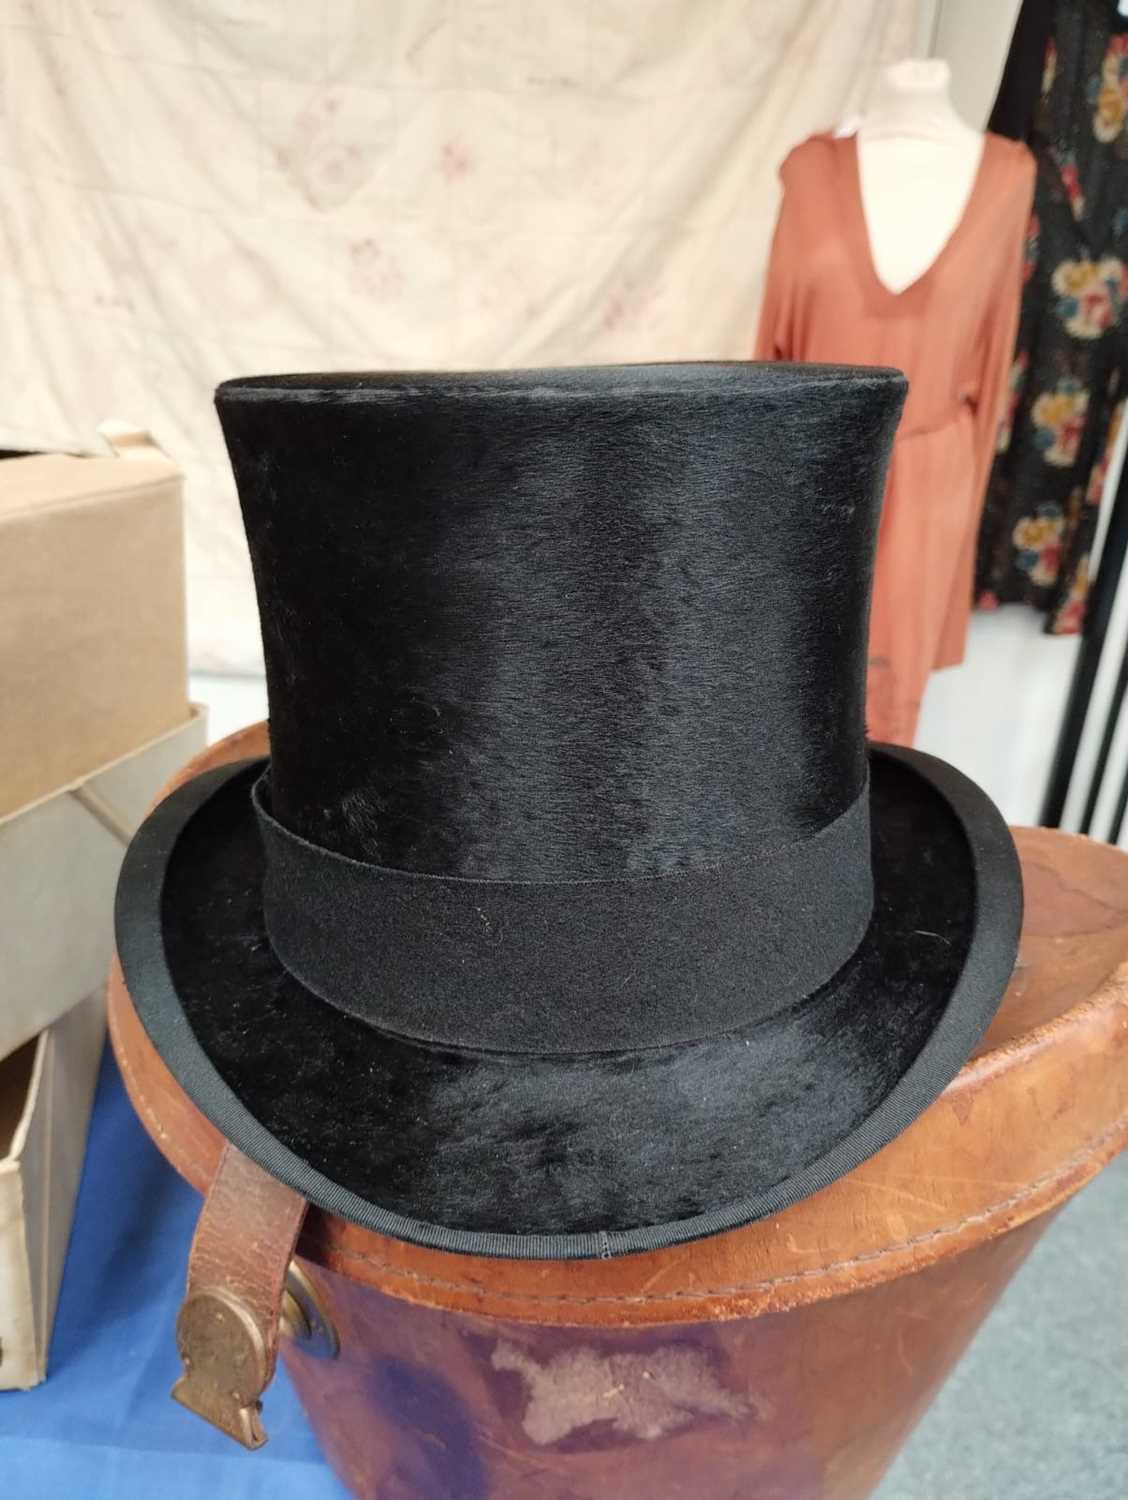 Black Silk Top Hat in Fitted Leather Hat Case with lime green cotton lining 20.5cm by 16.5cm, - Image 12 of 16